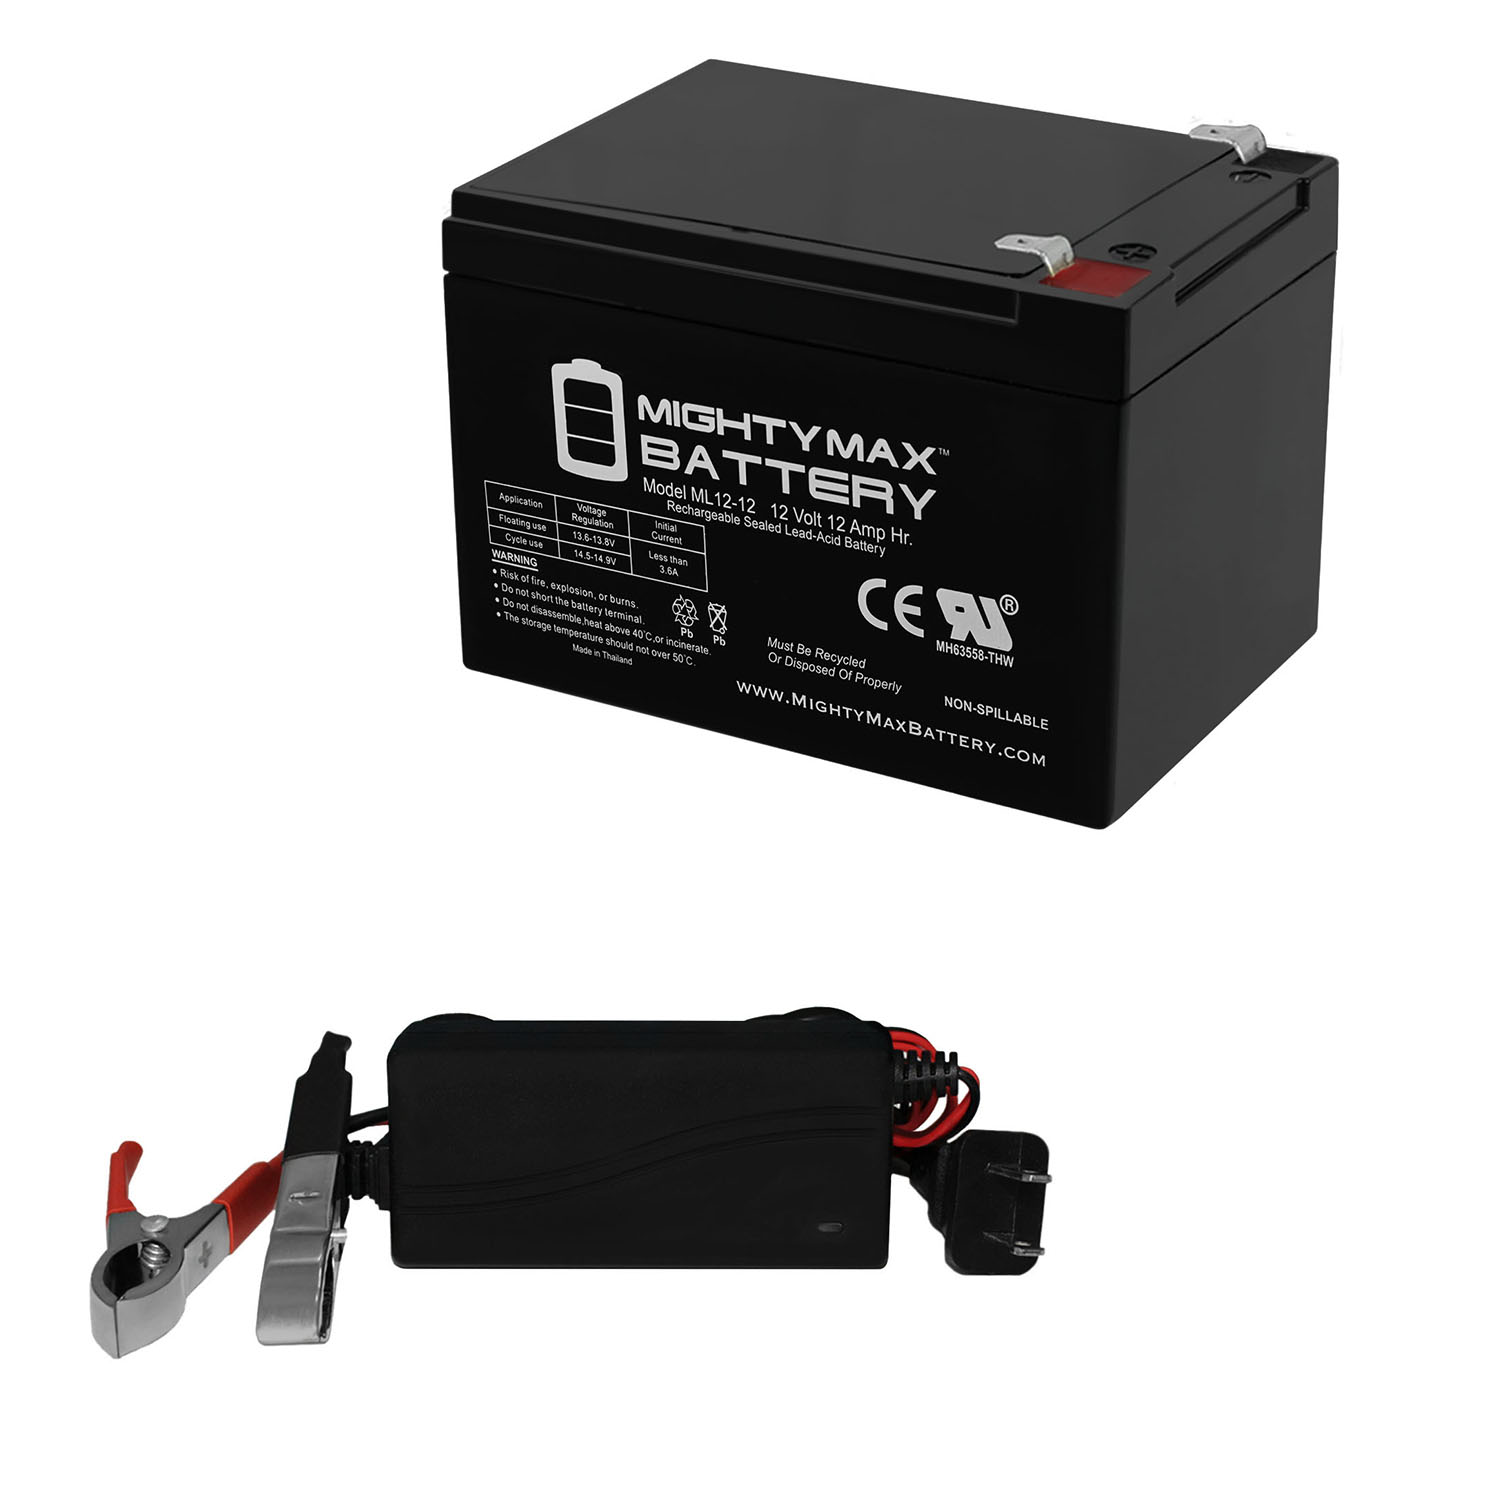 Mighty Max Battery 12 VOLT 12AH Replaces Conext 900AVR + 12V 1Amp Charger